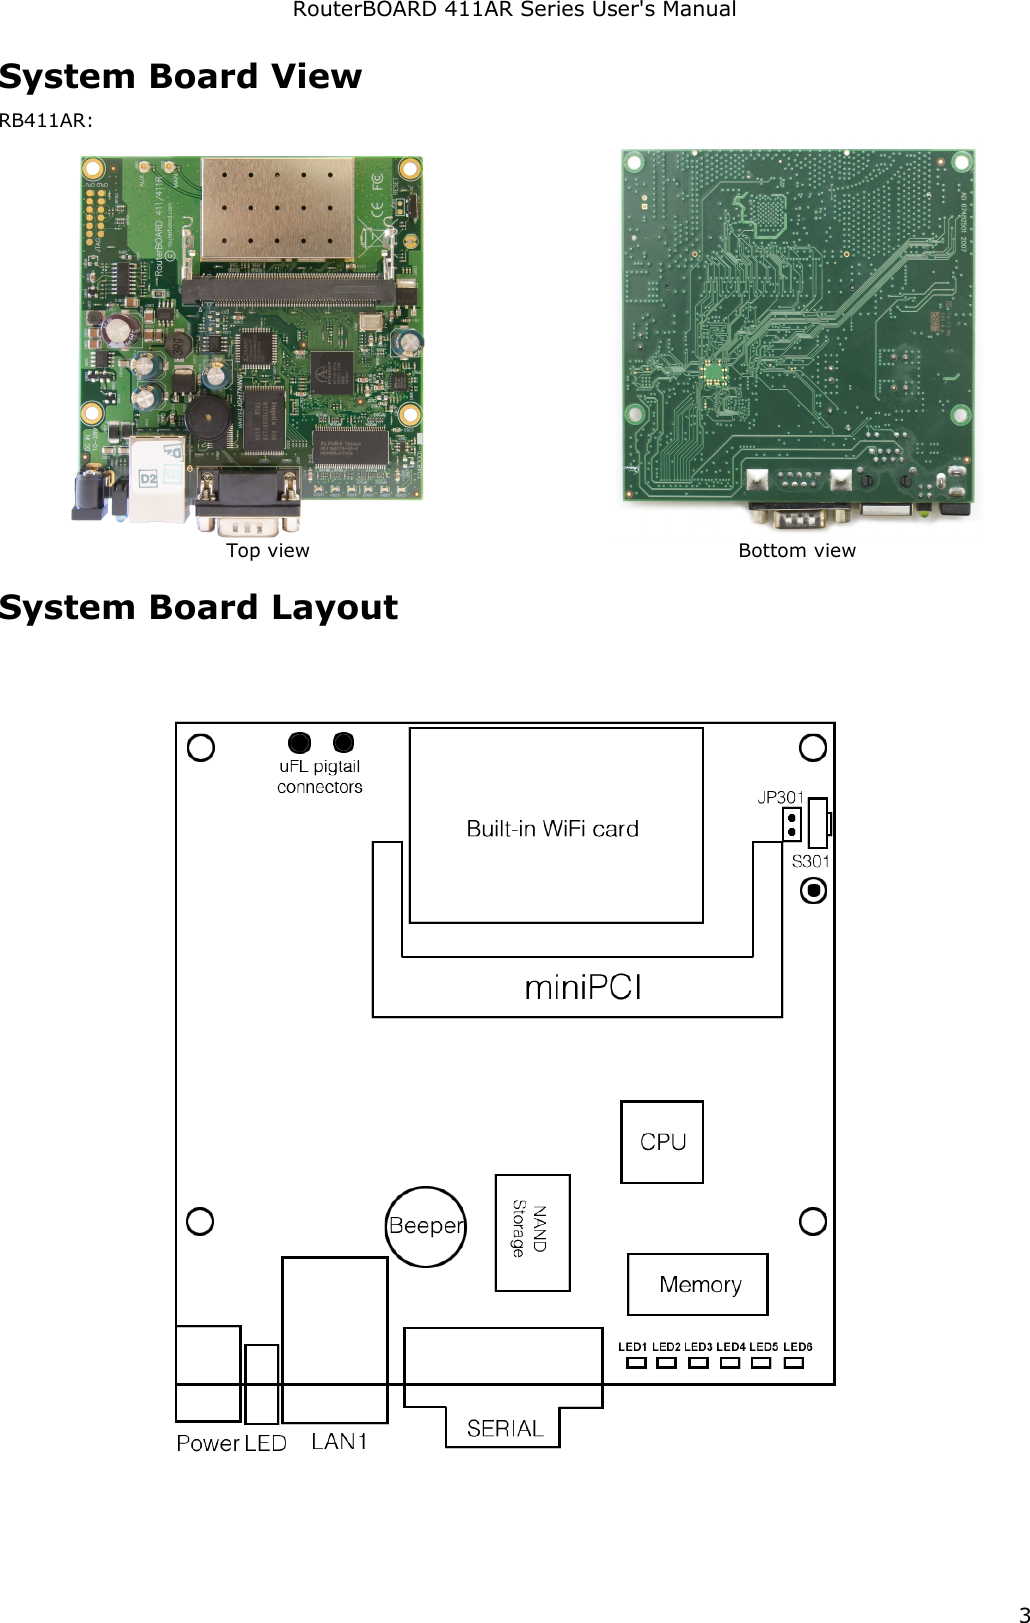 RouterBOARD 411AR Series User&apos;s ManualSystem Board ViewRB411AR:Top view Bottom viewSystem Board Layout3